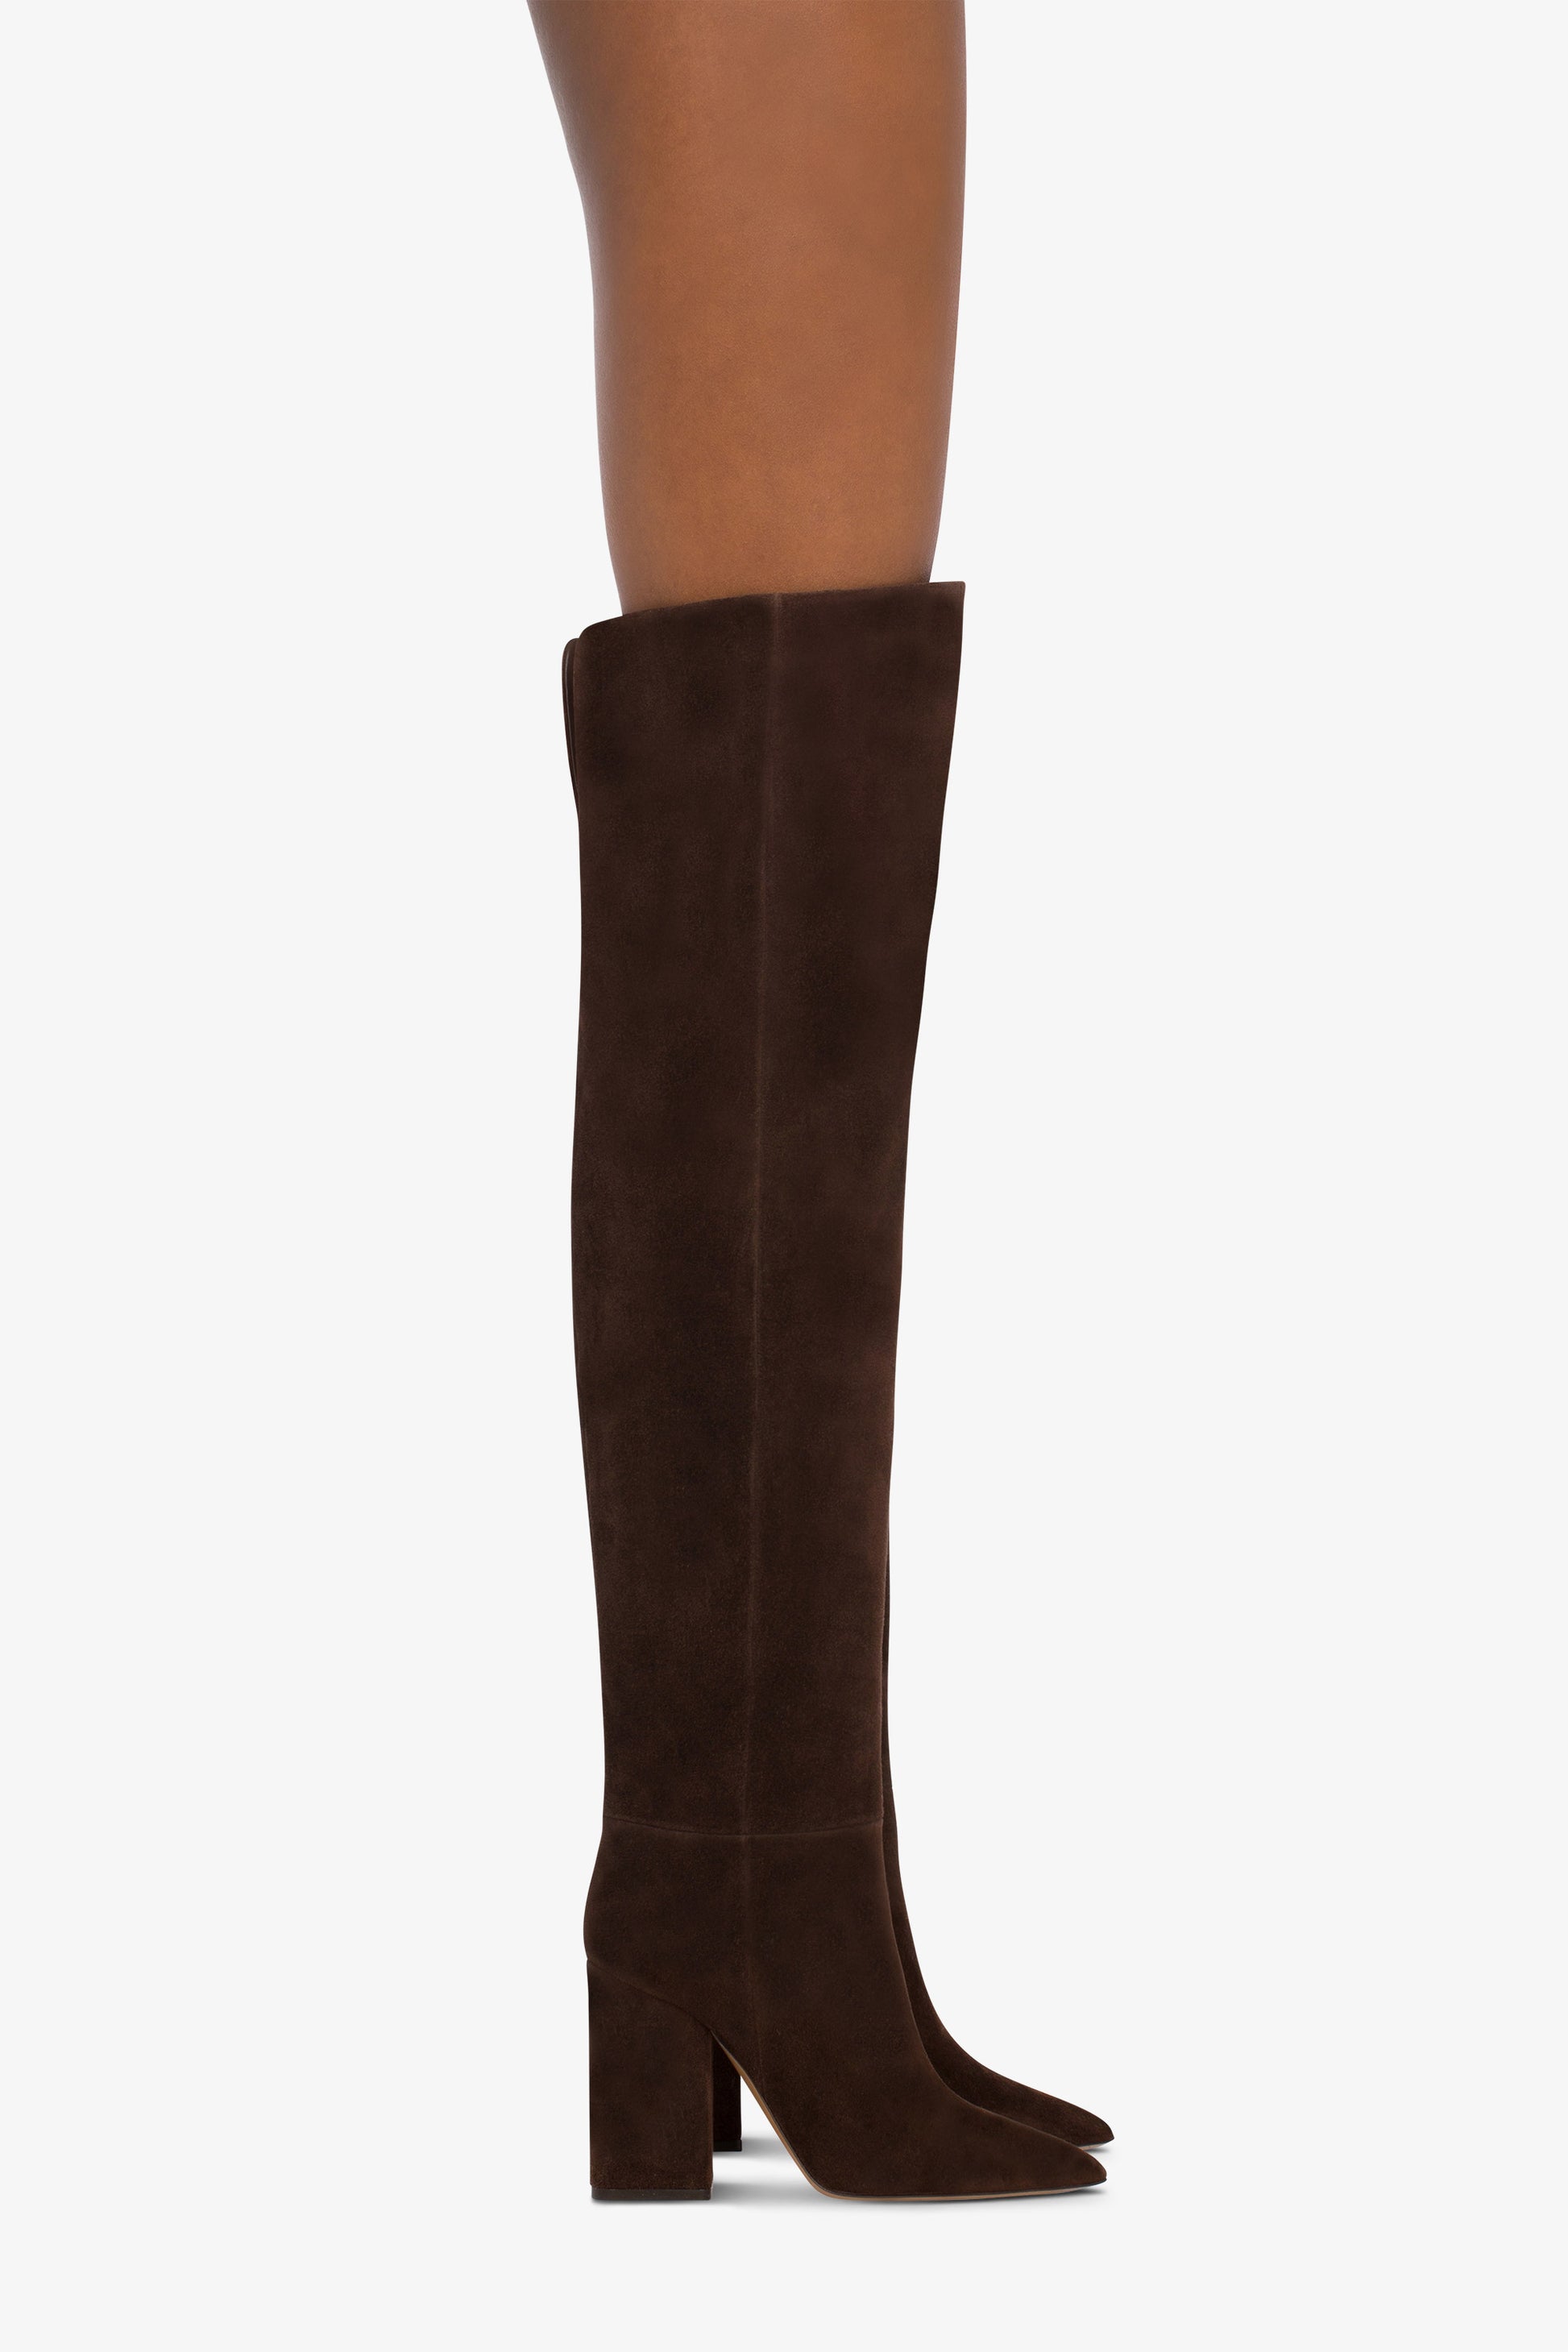 Over-the-knee, long pointed boots in soft pepper suede leather - Indossato